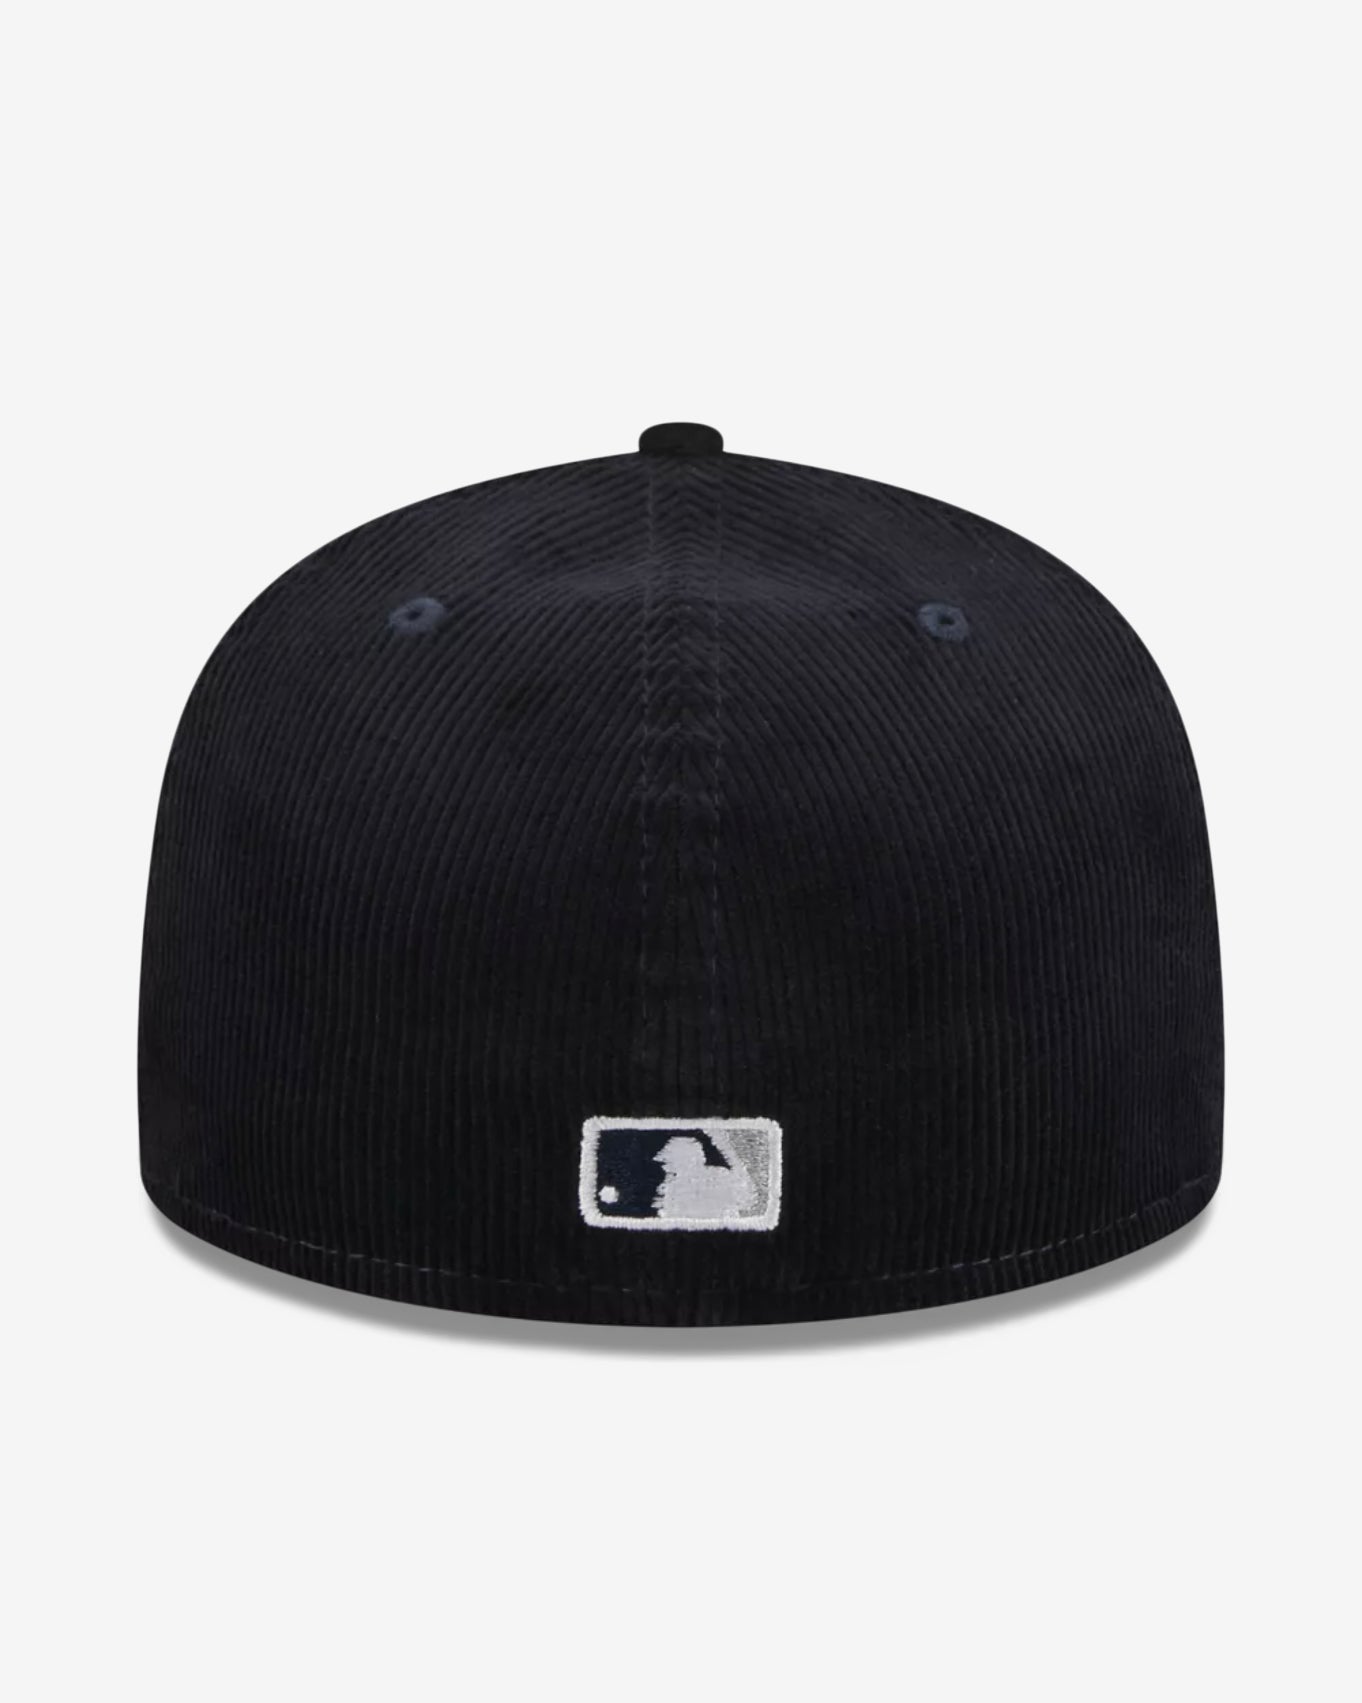 NEW YORK YANKEES THROWBACK CORD 59FIFTY - NAVY